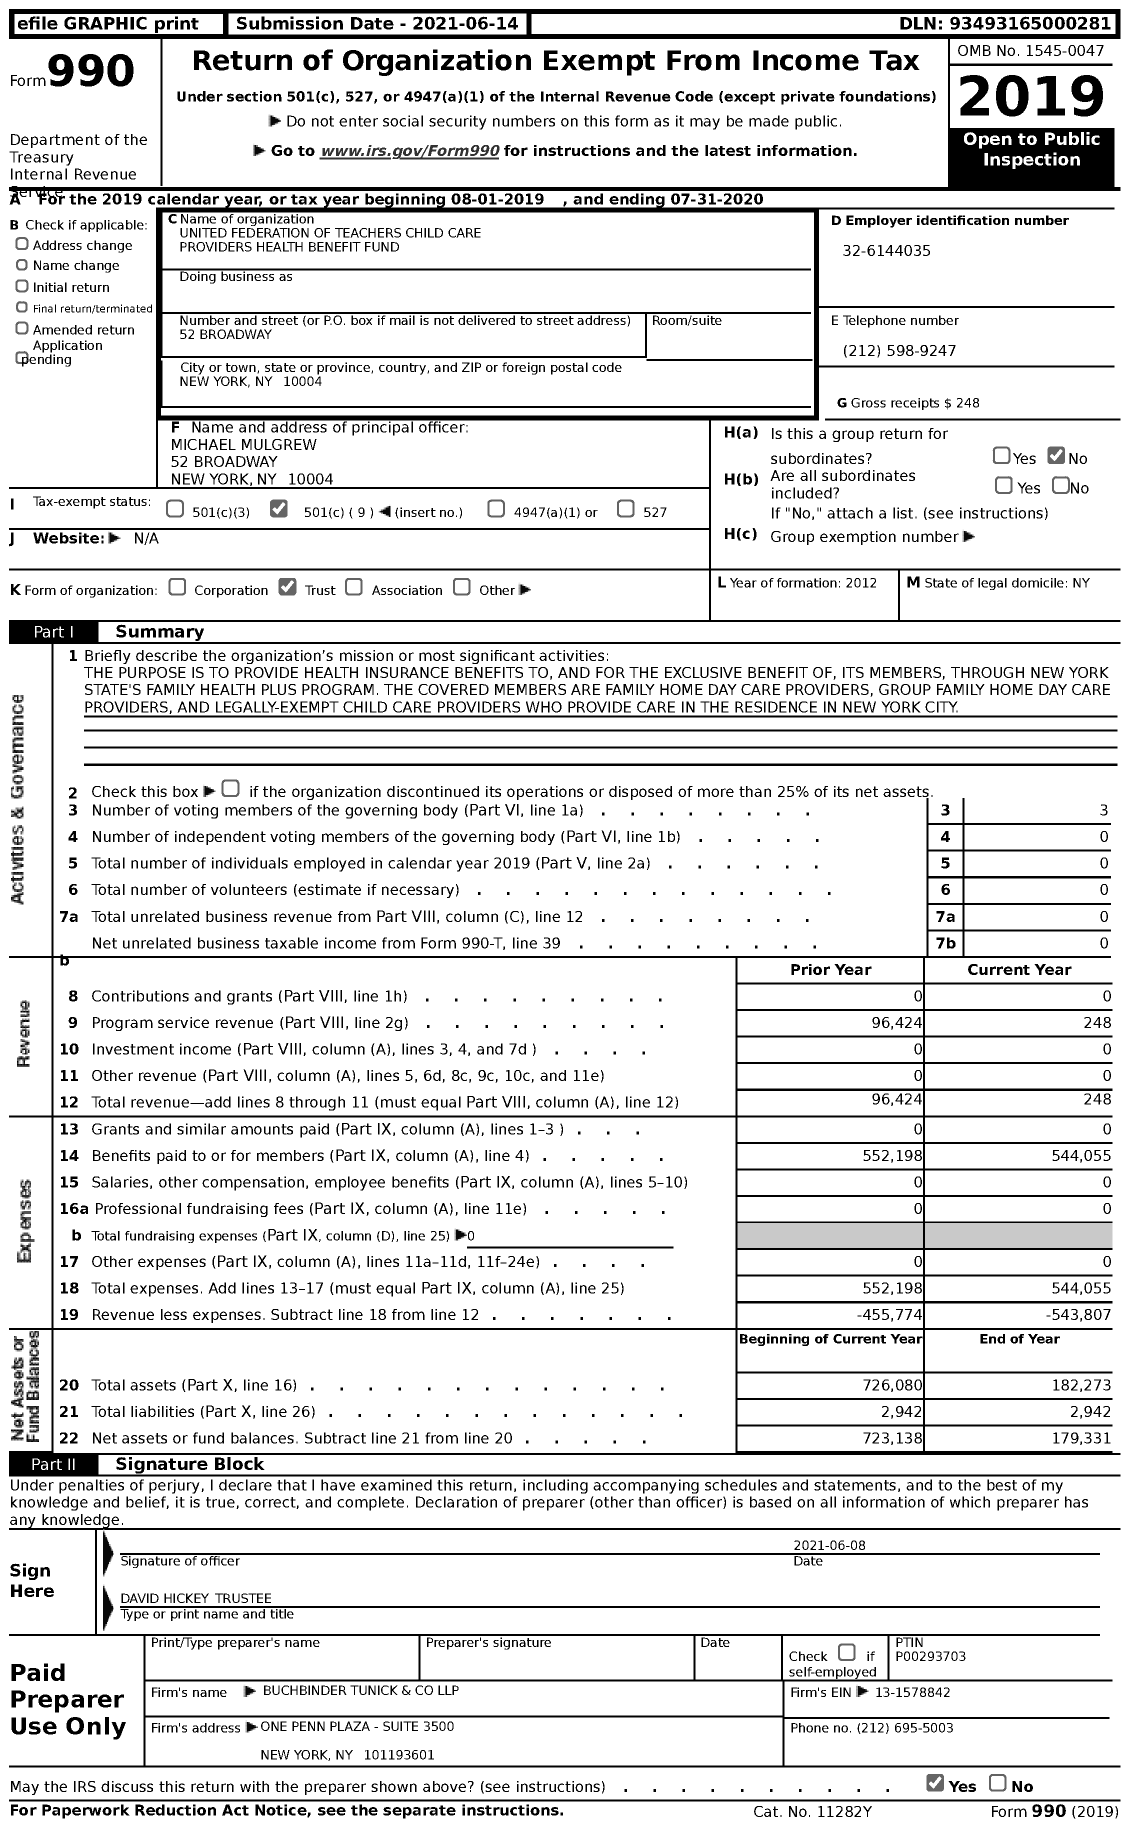 Image of first page of 2019 Form 990 for United Federation of Teachers Child Care Providers Health Benefit Fund